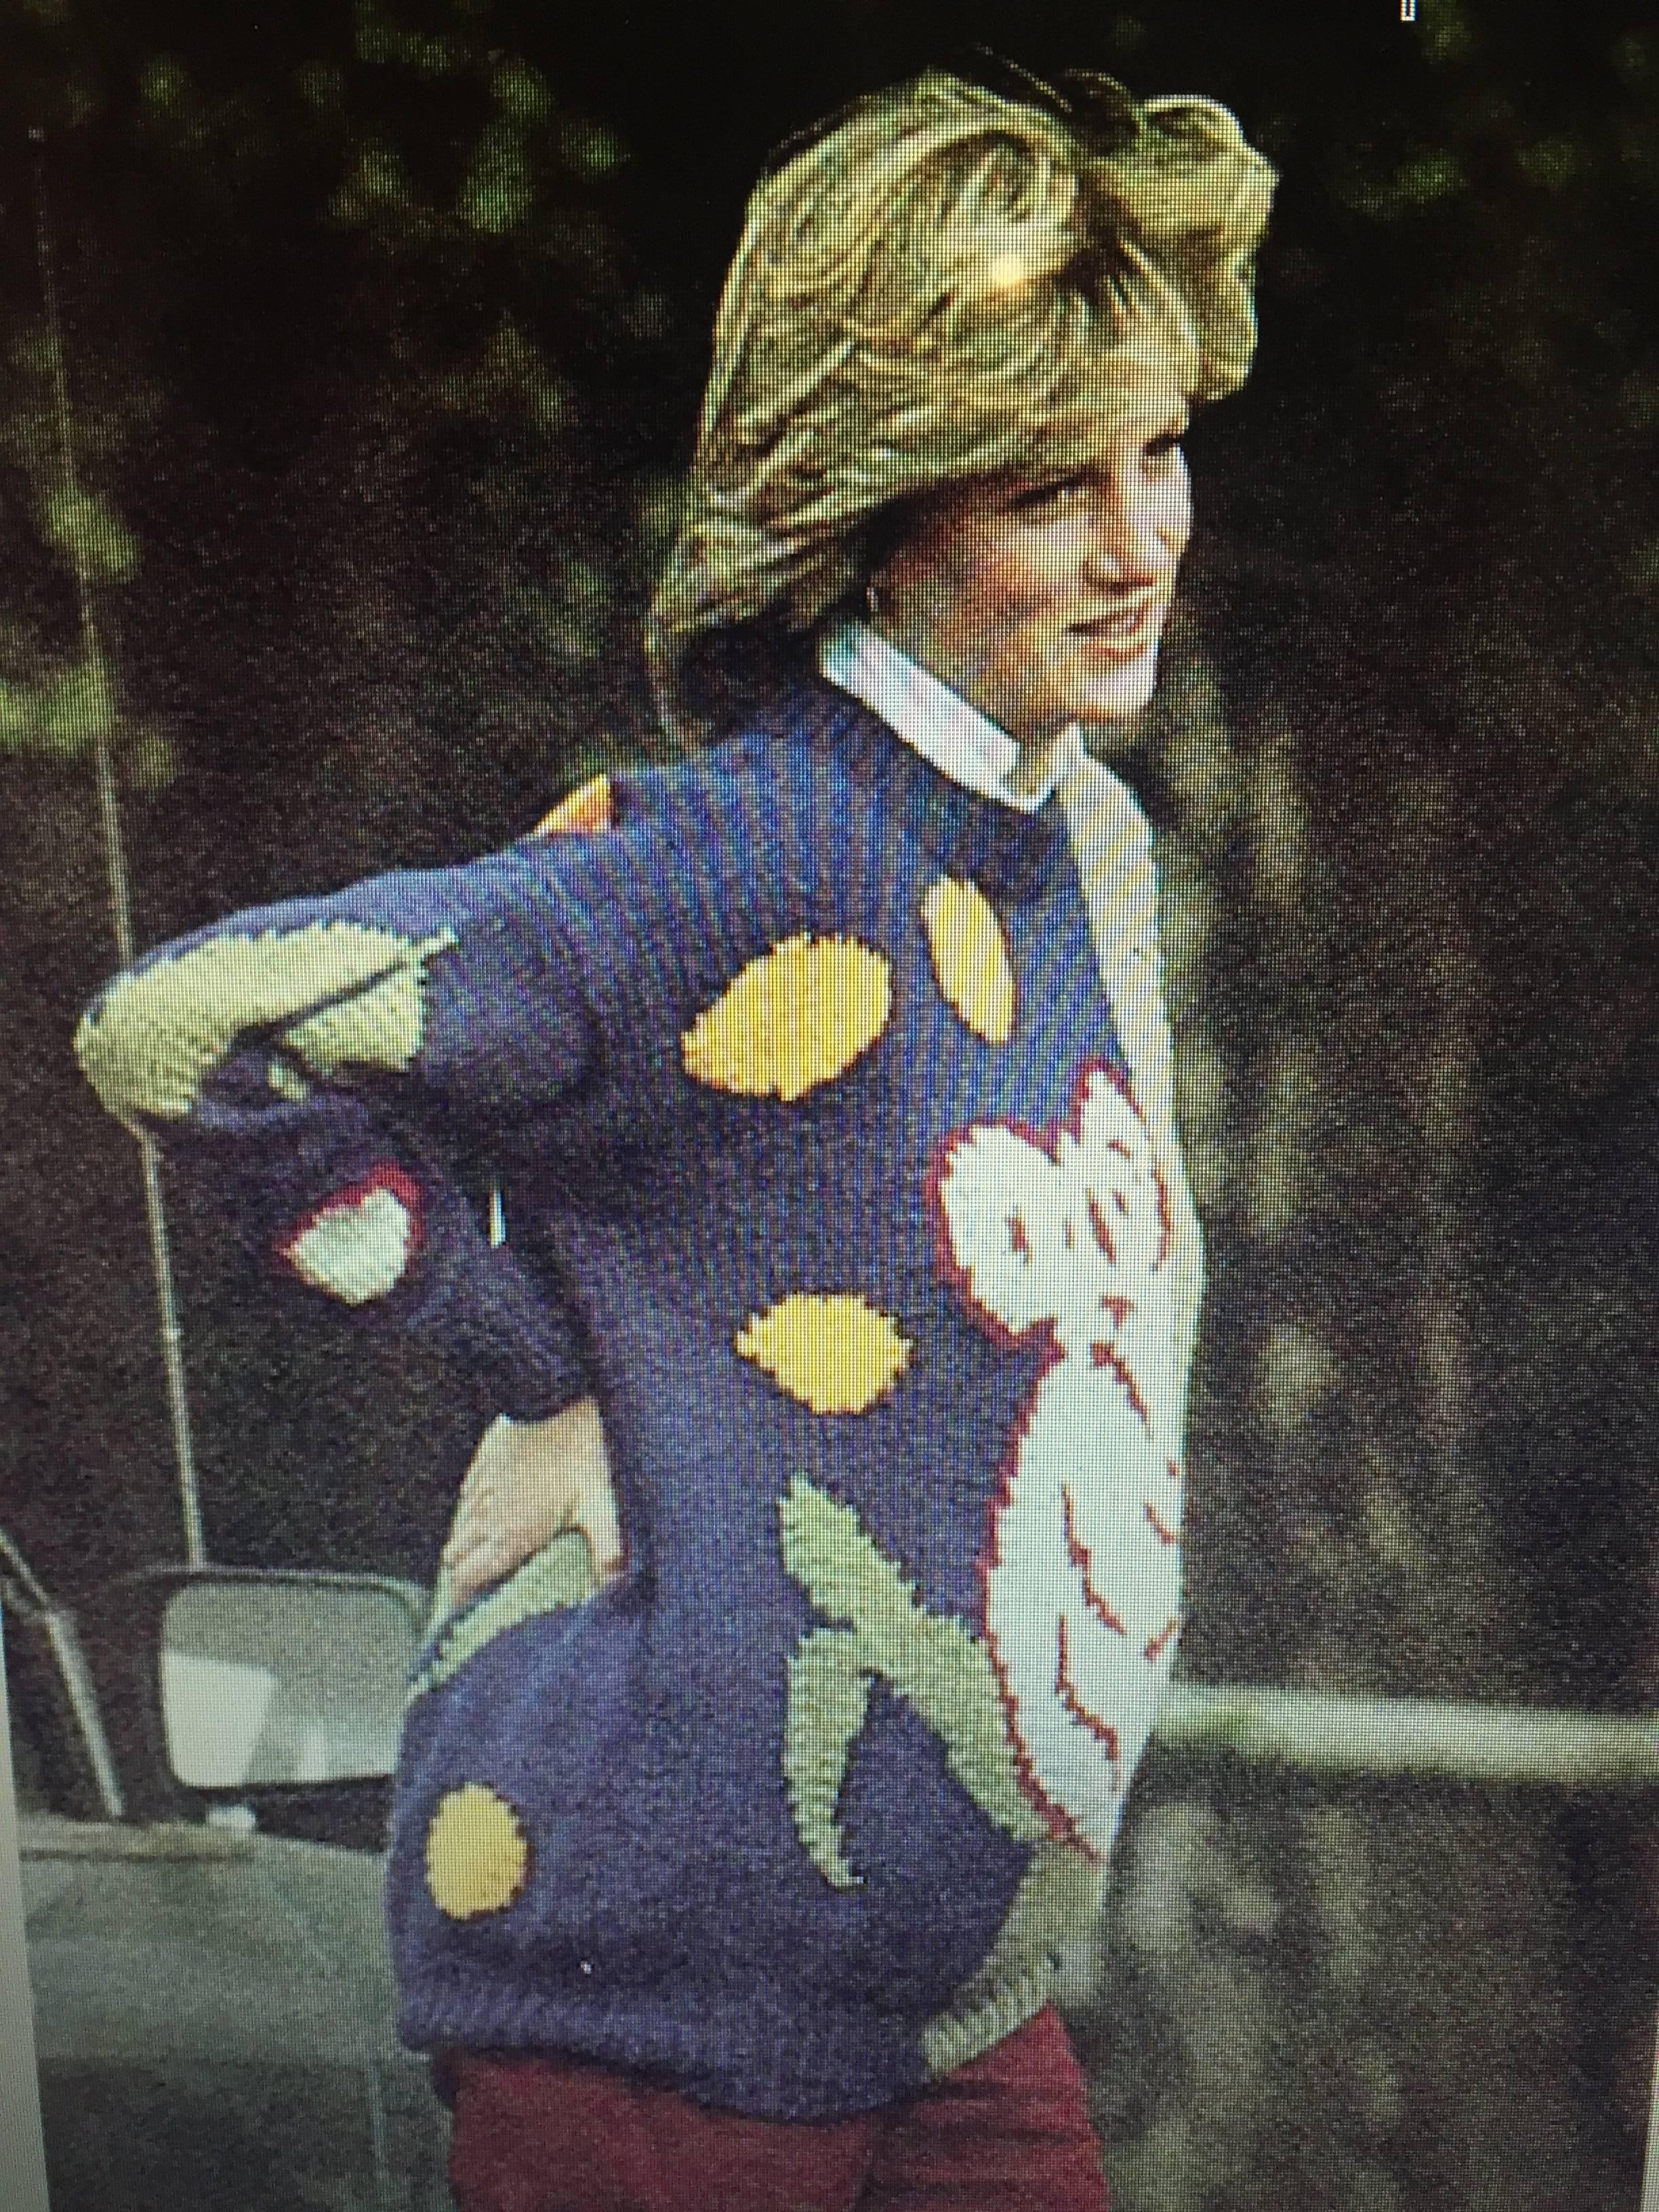 Made famous by Princess Diana who wore this sweater at a polo match to cover her growing bump when she was pregnant with Prince William. This well cared for vintage sweater from 1981 is perfect for collectors of the past and fashion lovers of the